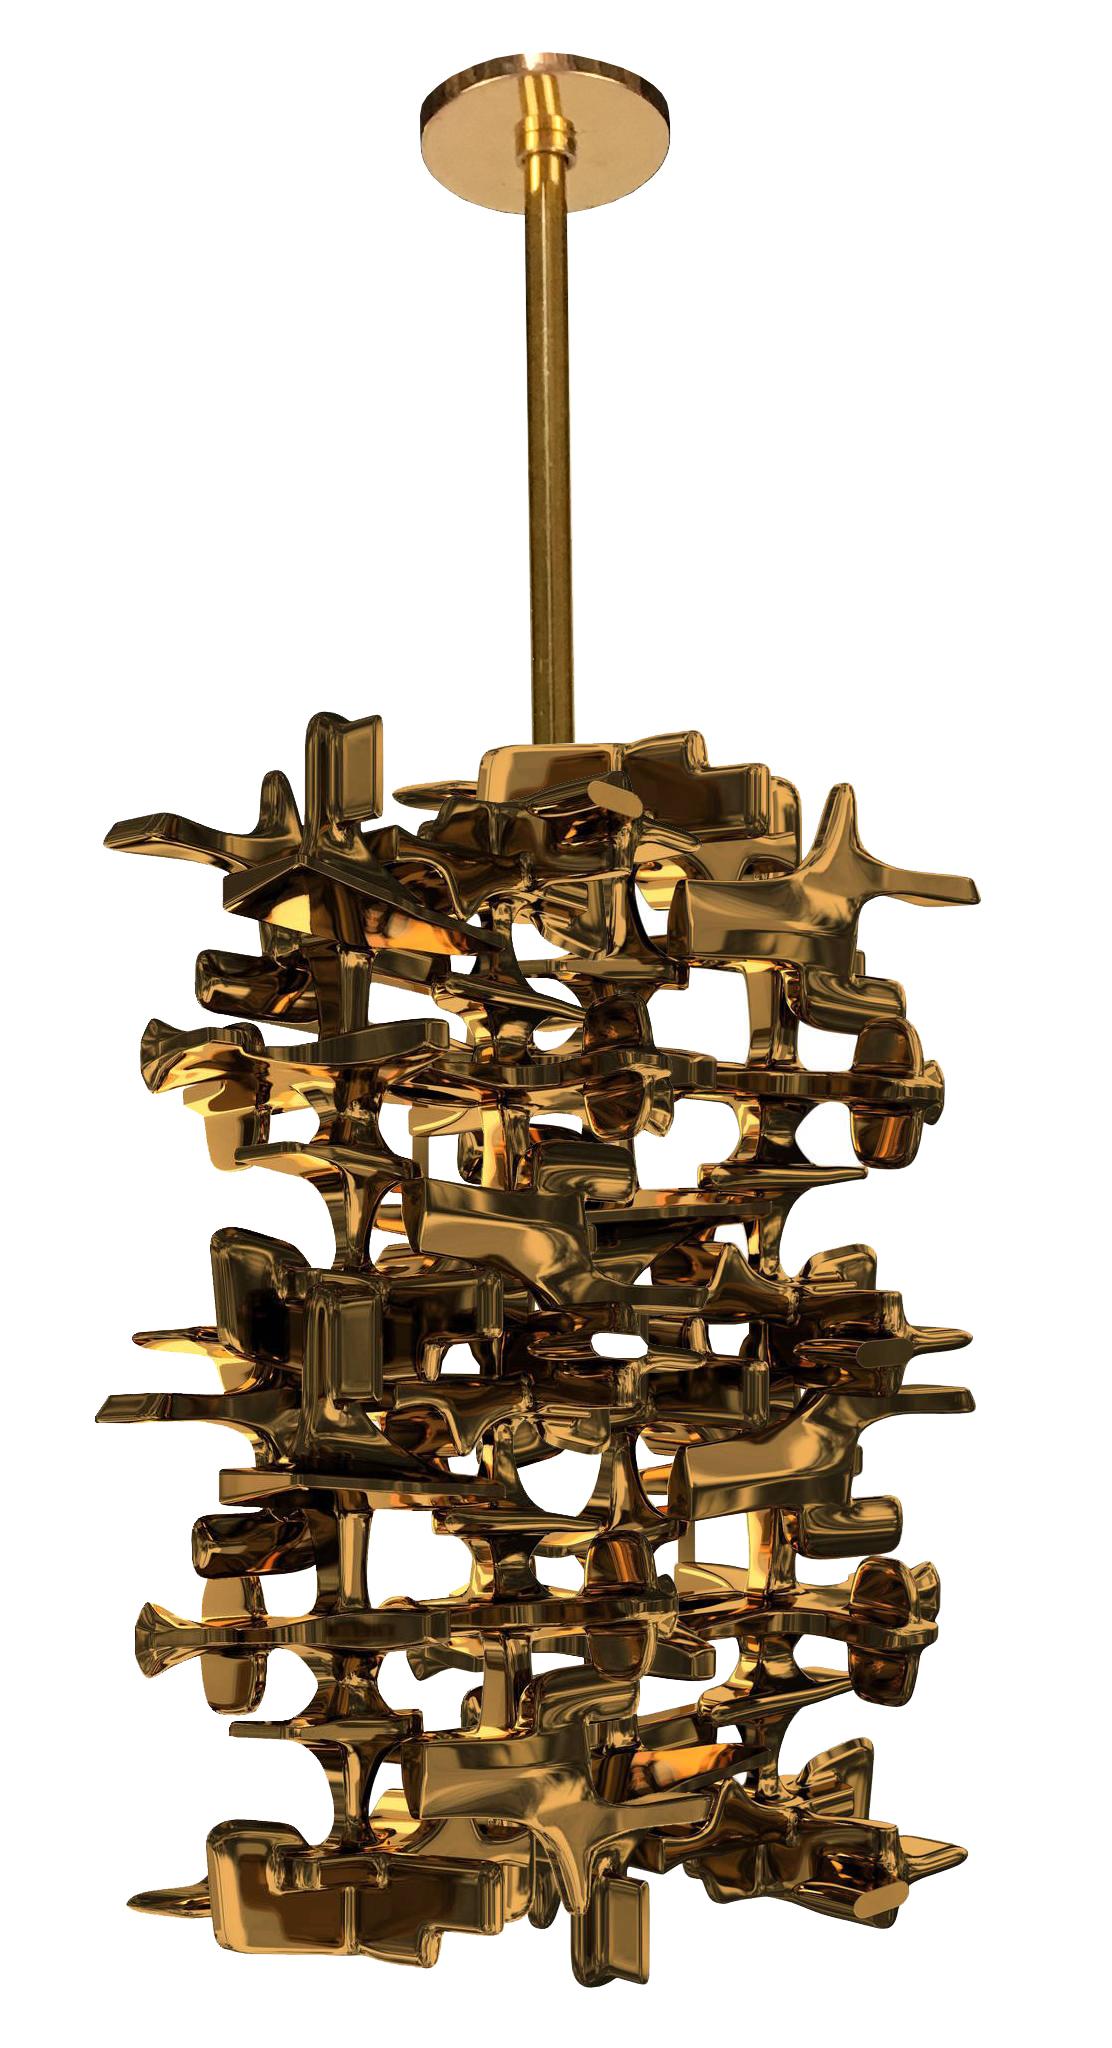 The Roen sconce by Craig Van Den Brulle.

Available in a high polish bronze or high polish aluminium.

Price is for a single sconce.